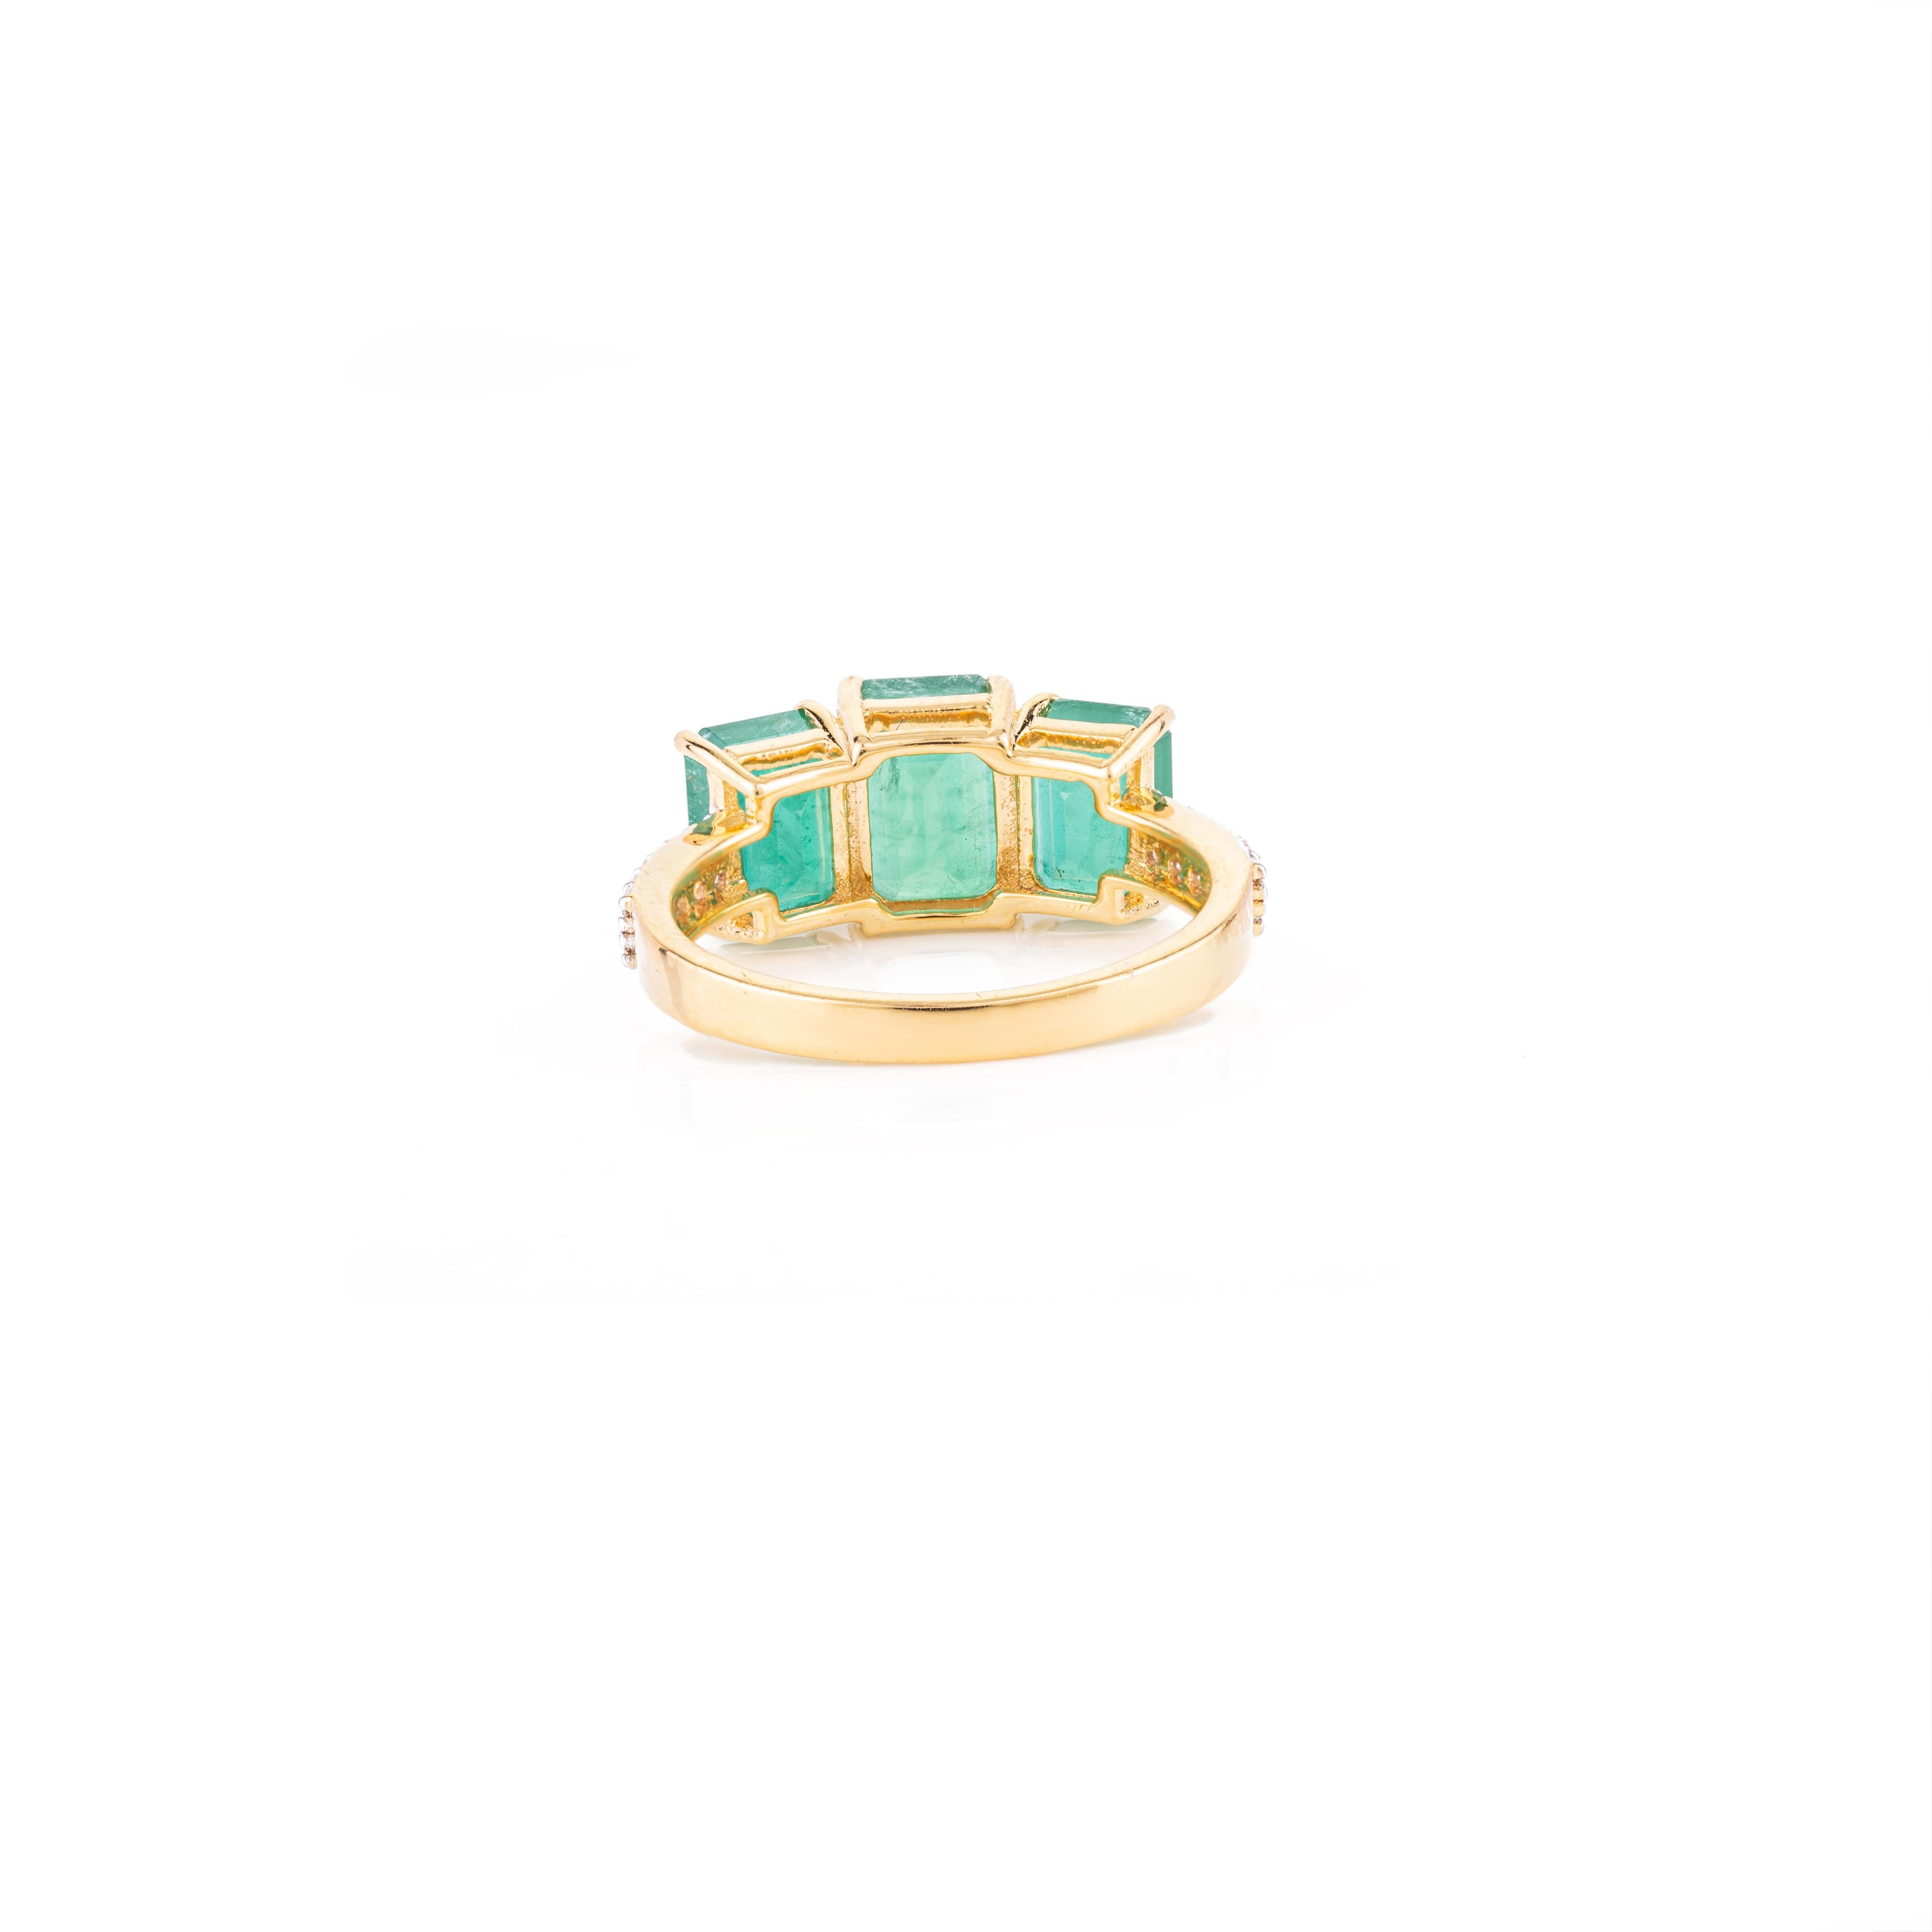 For Sale:  4.14 CTW Three Stone Genuine Emerald Ring with Diamonds in 18k Yellow Gold  6